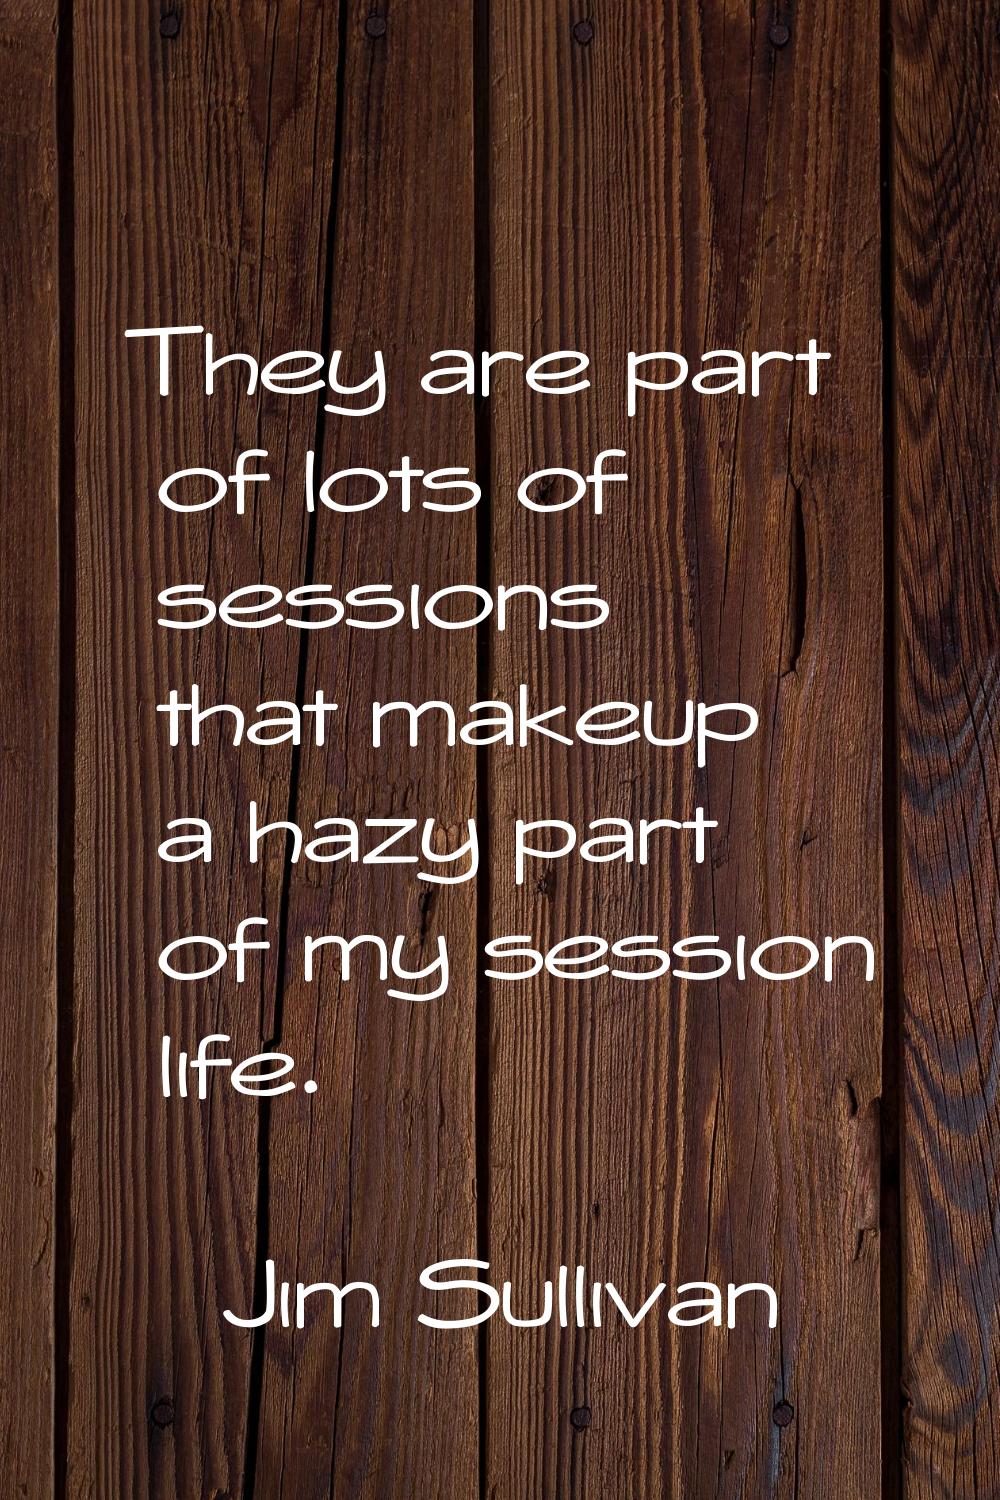 They are part of lots of sessions that makeup a hazy part of my session life.